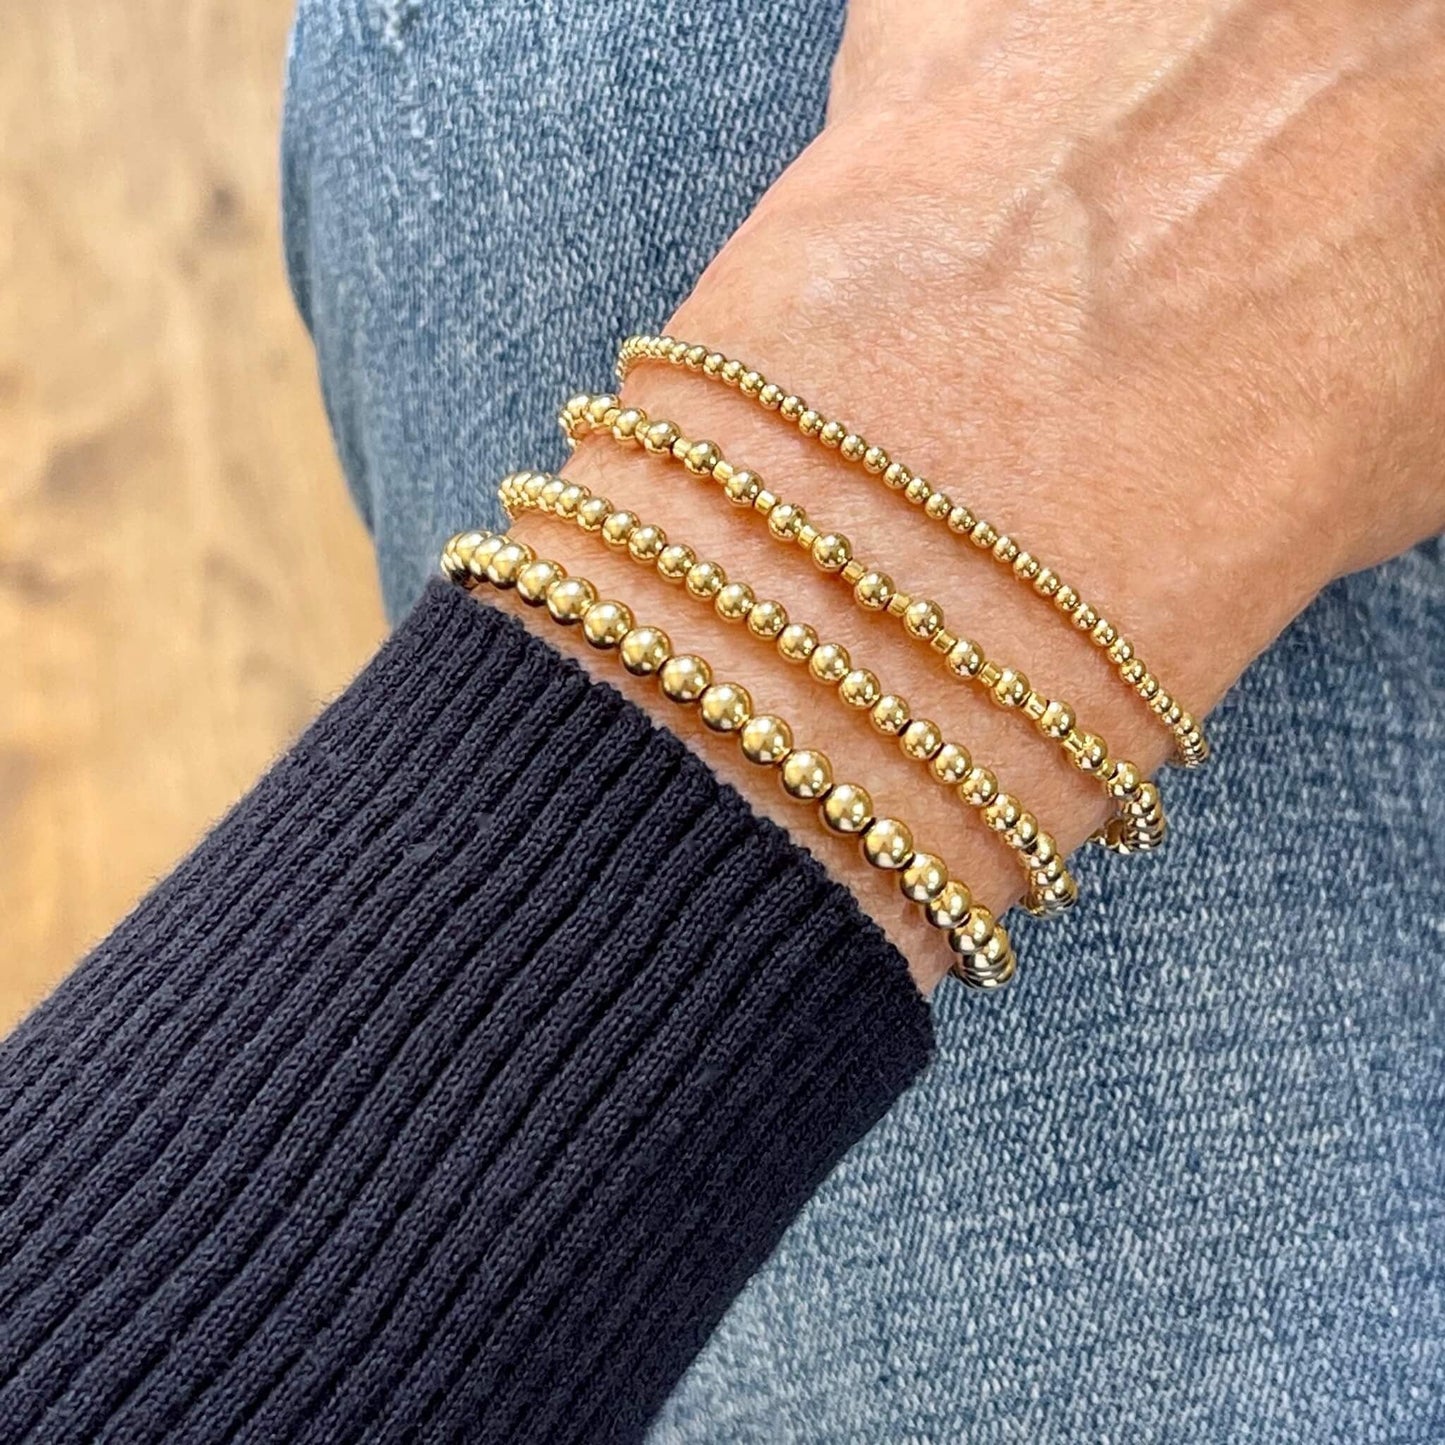 Gold ball bracelets. Gold stretch bracelets for stacking in 2mm, 3mm, & 4mm waterproof, tarnish-resistant beads.